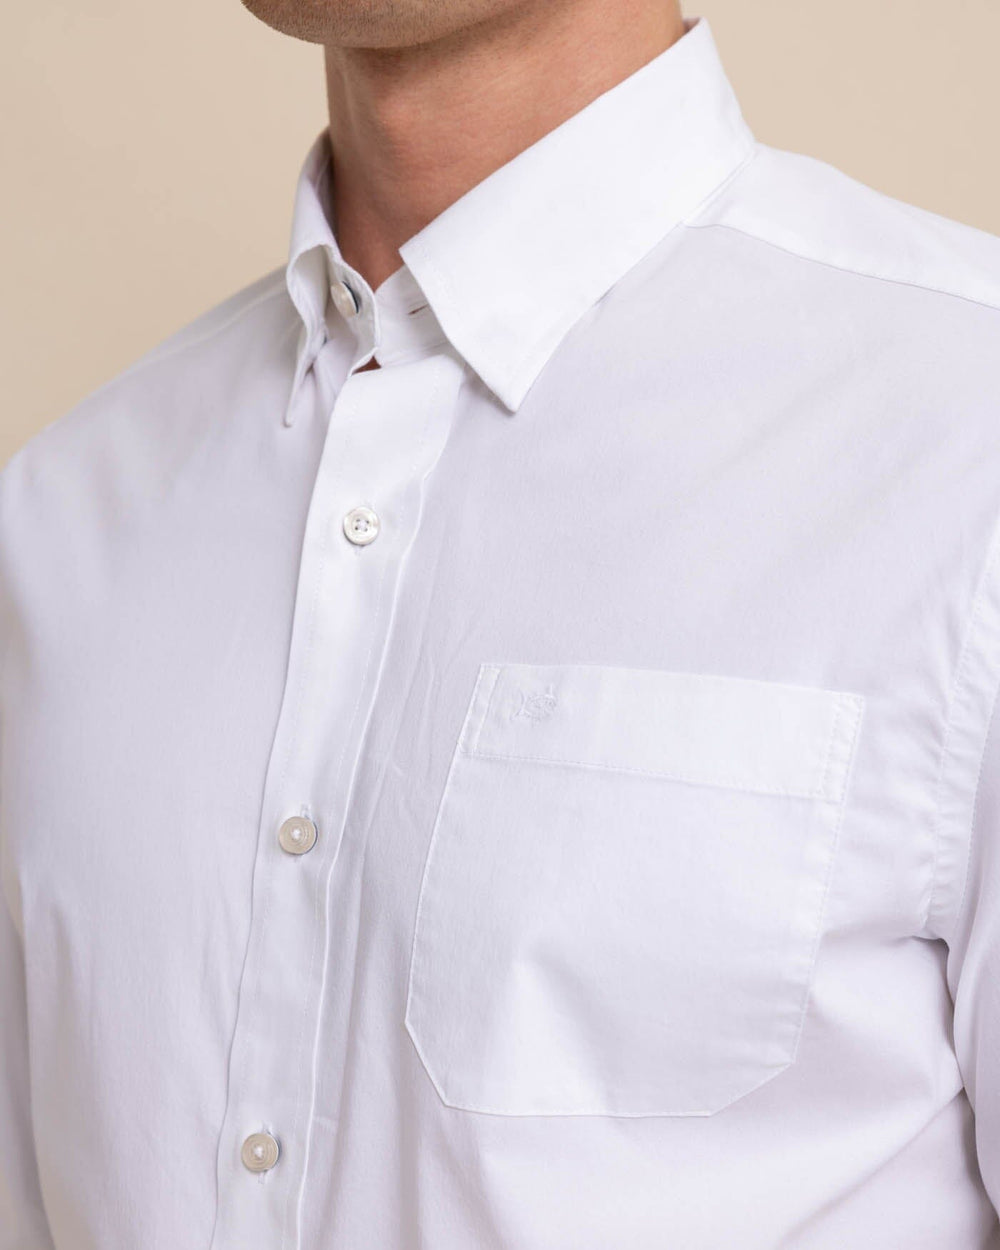 The detail view of the Southern Tide Charleston Overbrook Solid Long Sleeve Sport Shirt by Southern Tide - Classic White